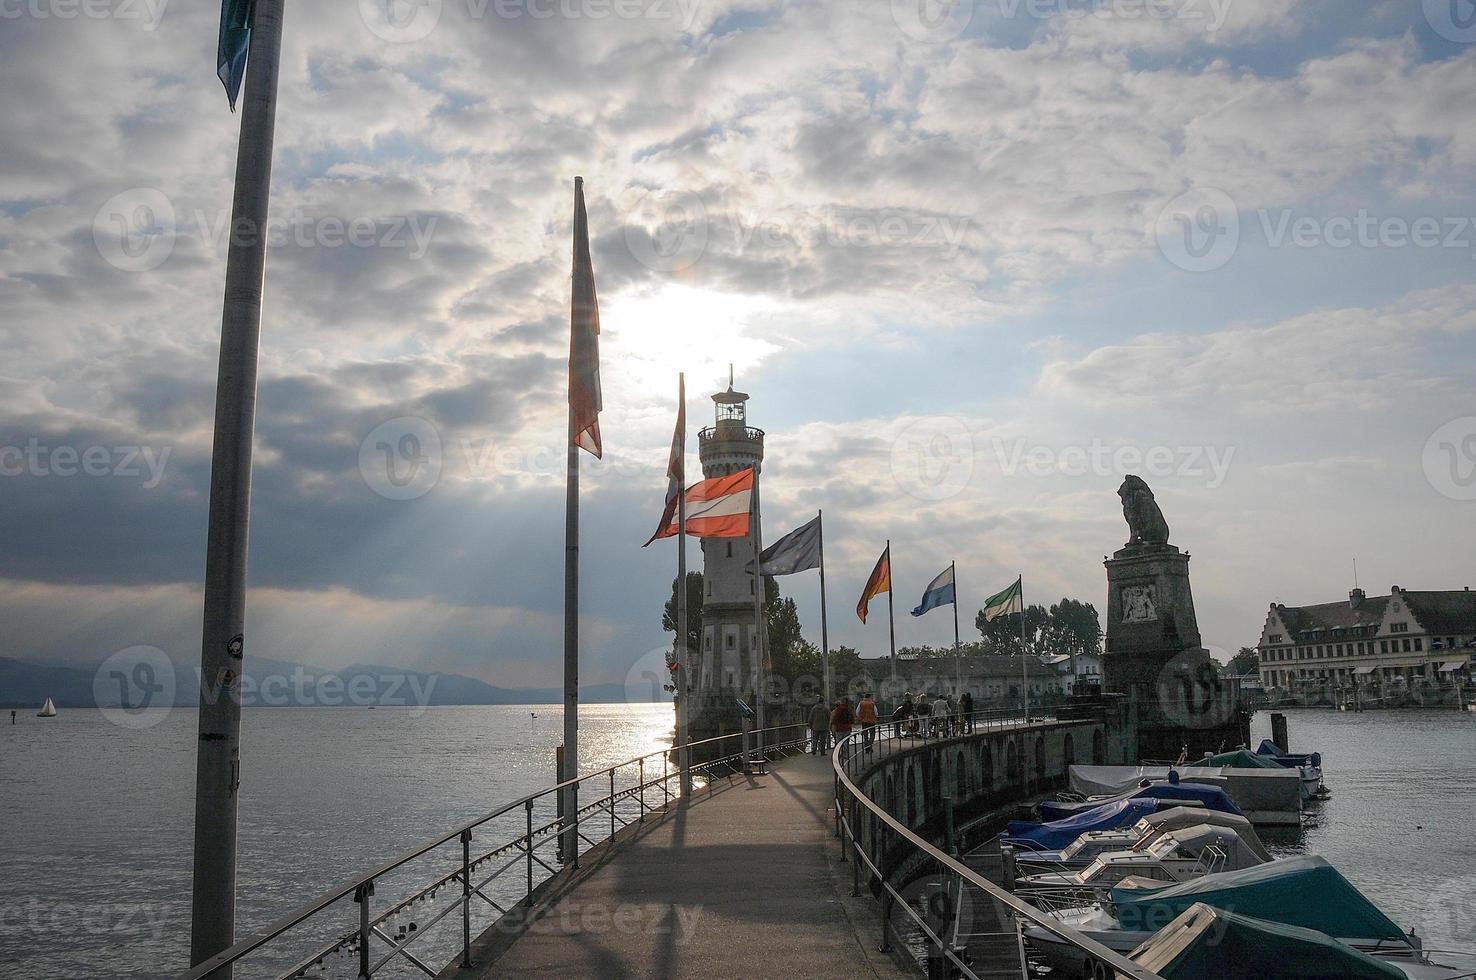 The lake constance in germany photo